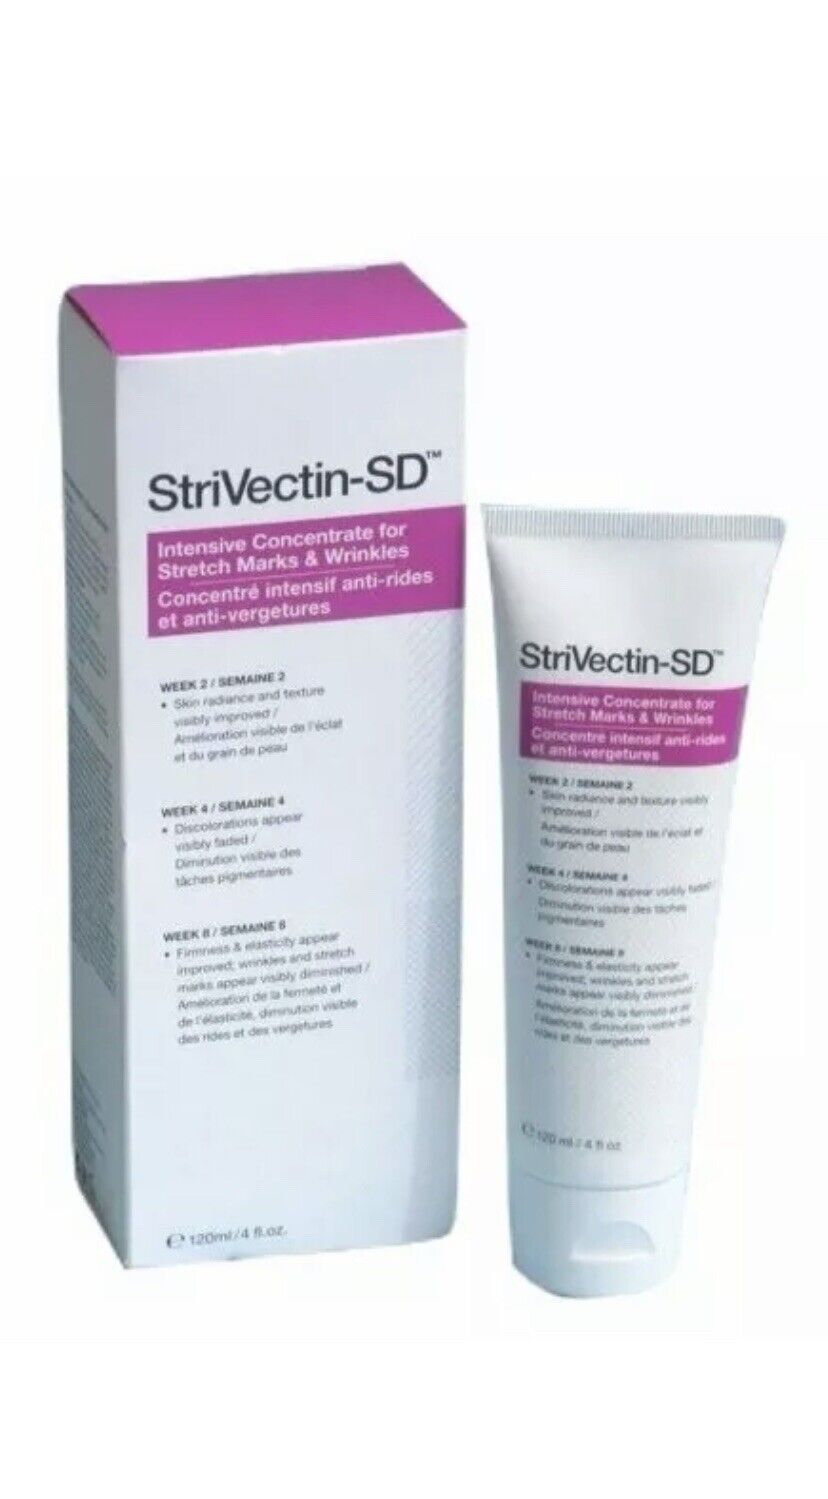 StriVectin SD Intensive Concentrate for Stretch Marks & Wrinkles 4 oz